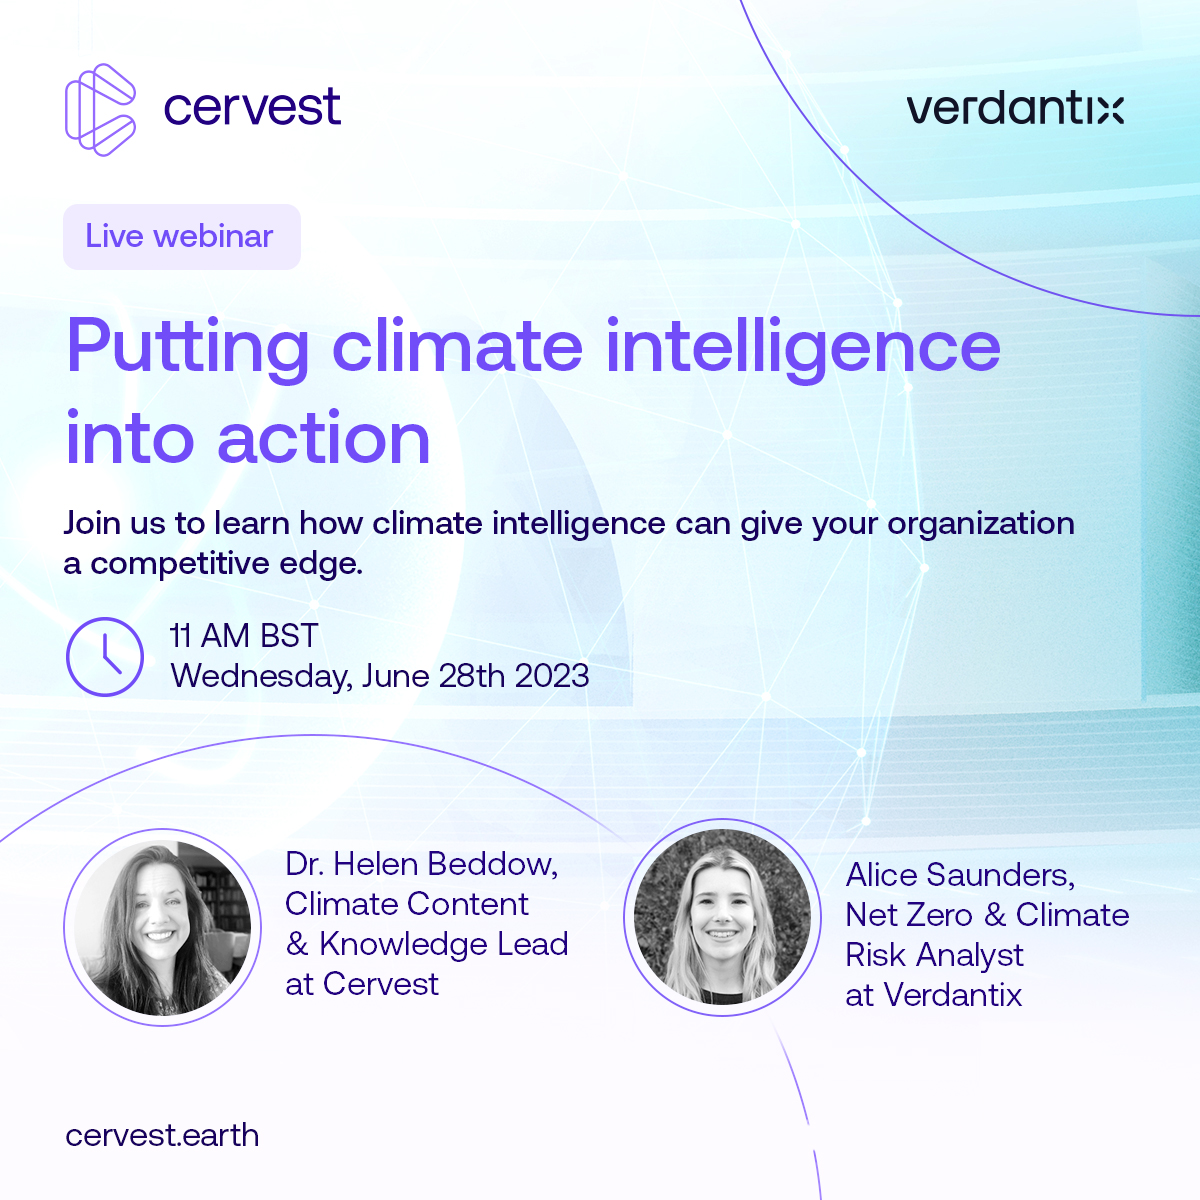 📹 Free webinar: Putting climate intelligence (CI) into action ⏰ Time: 11AM BST 📅 June 28, 2023 Quiz industry experts about #ClimateRisk, and learn how CI can help you find climate-related opportunities. Register now 👇 cervest.earth/webinar/climat…